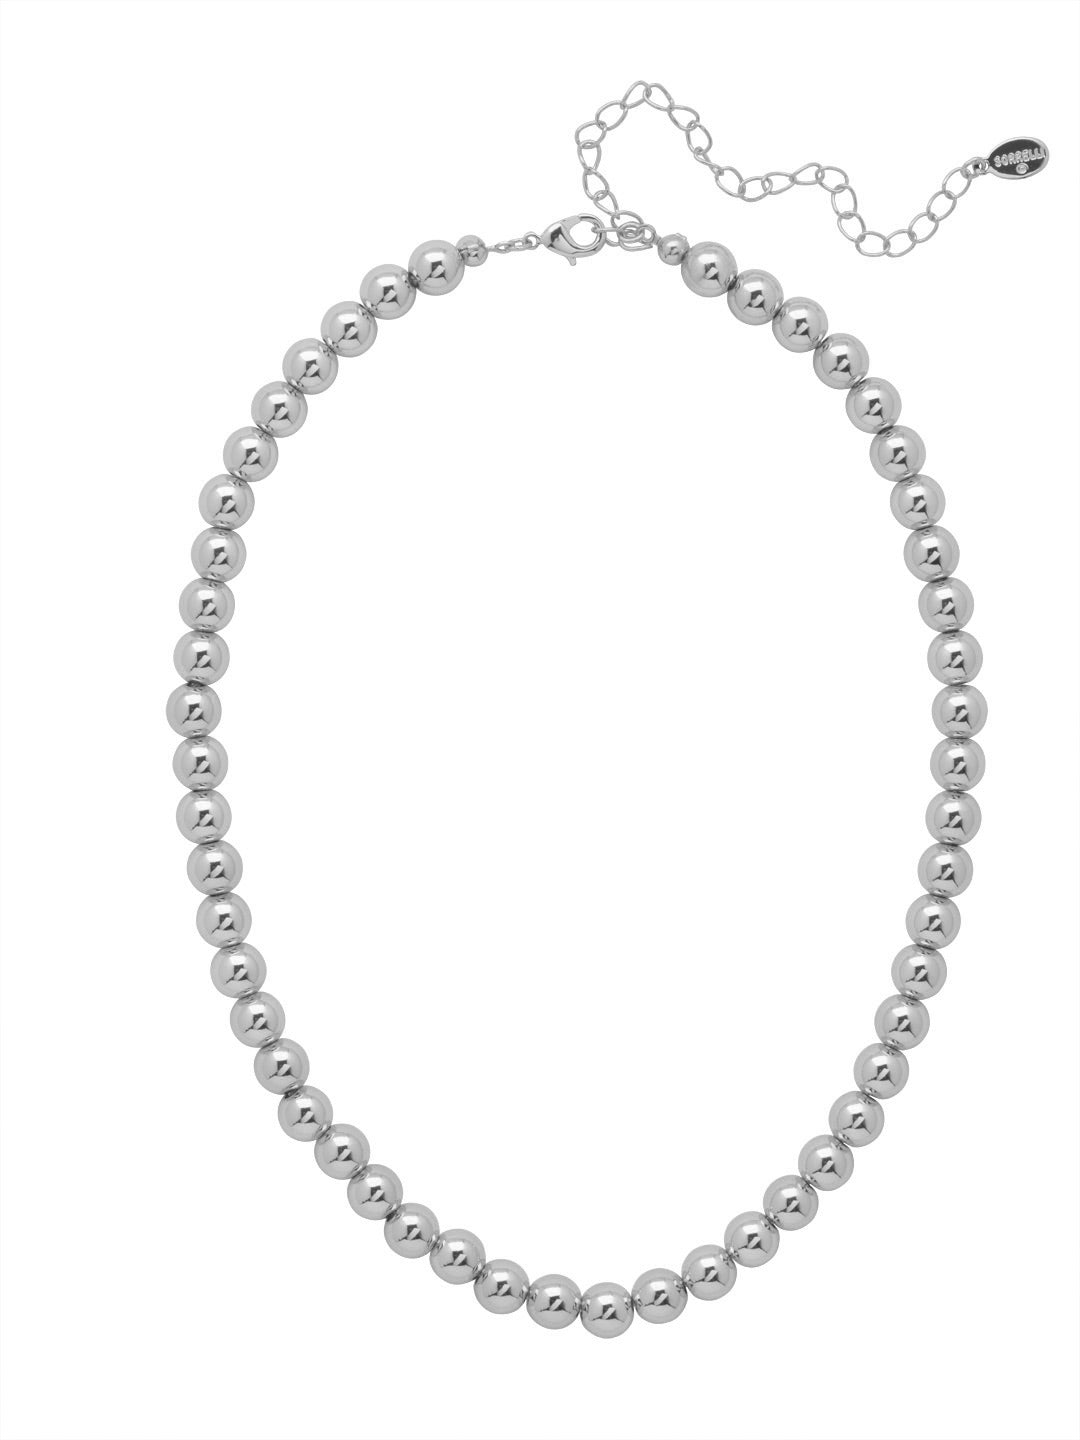 Zola Tennis Necklace - 4NFJ21PDMTL - <p>The Zola Tennis Necklace features repeating metal beads on an adjustable chain, secured with a lobster claw clasp. From Sorrelli's Bare Metallic collection in our Palladium finish.</p>